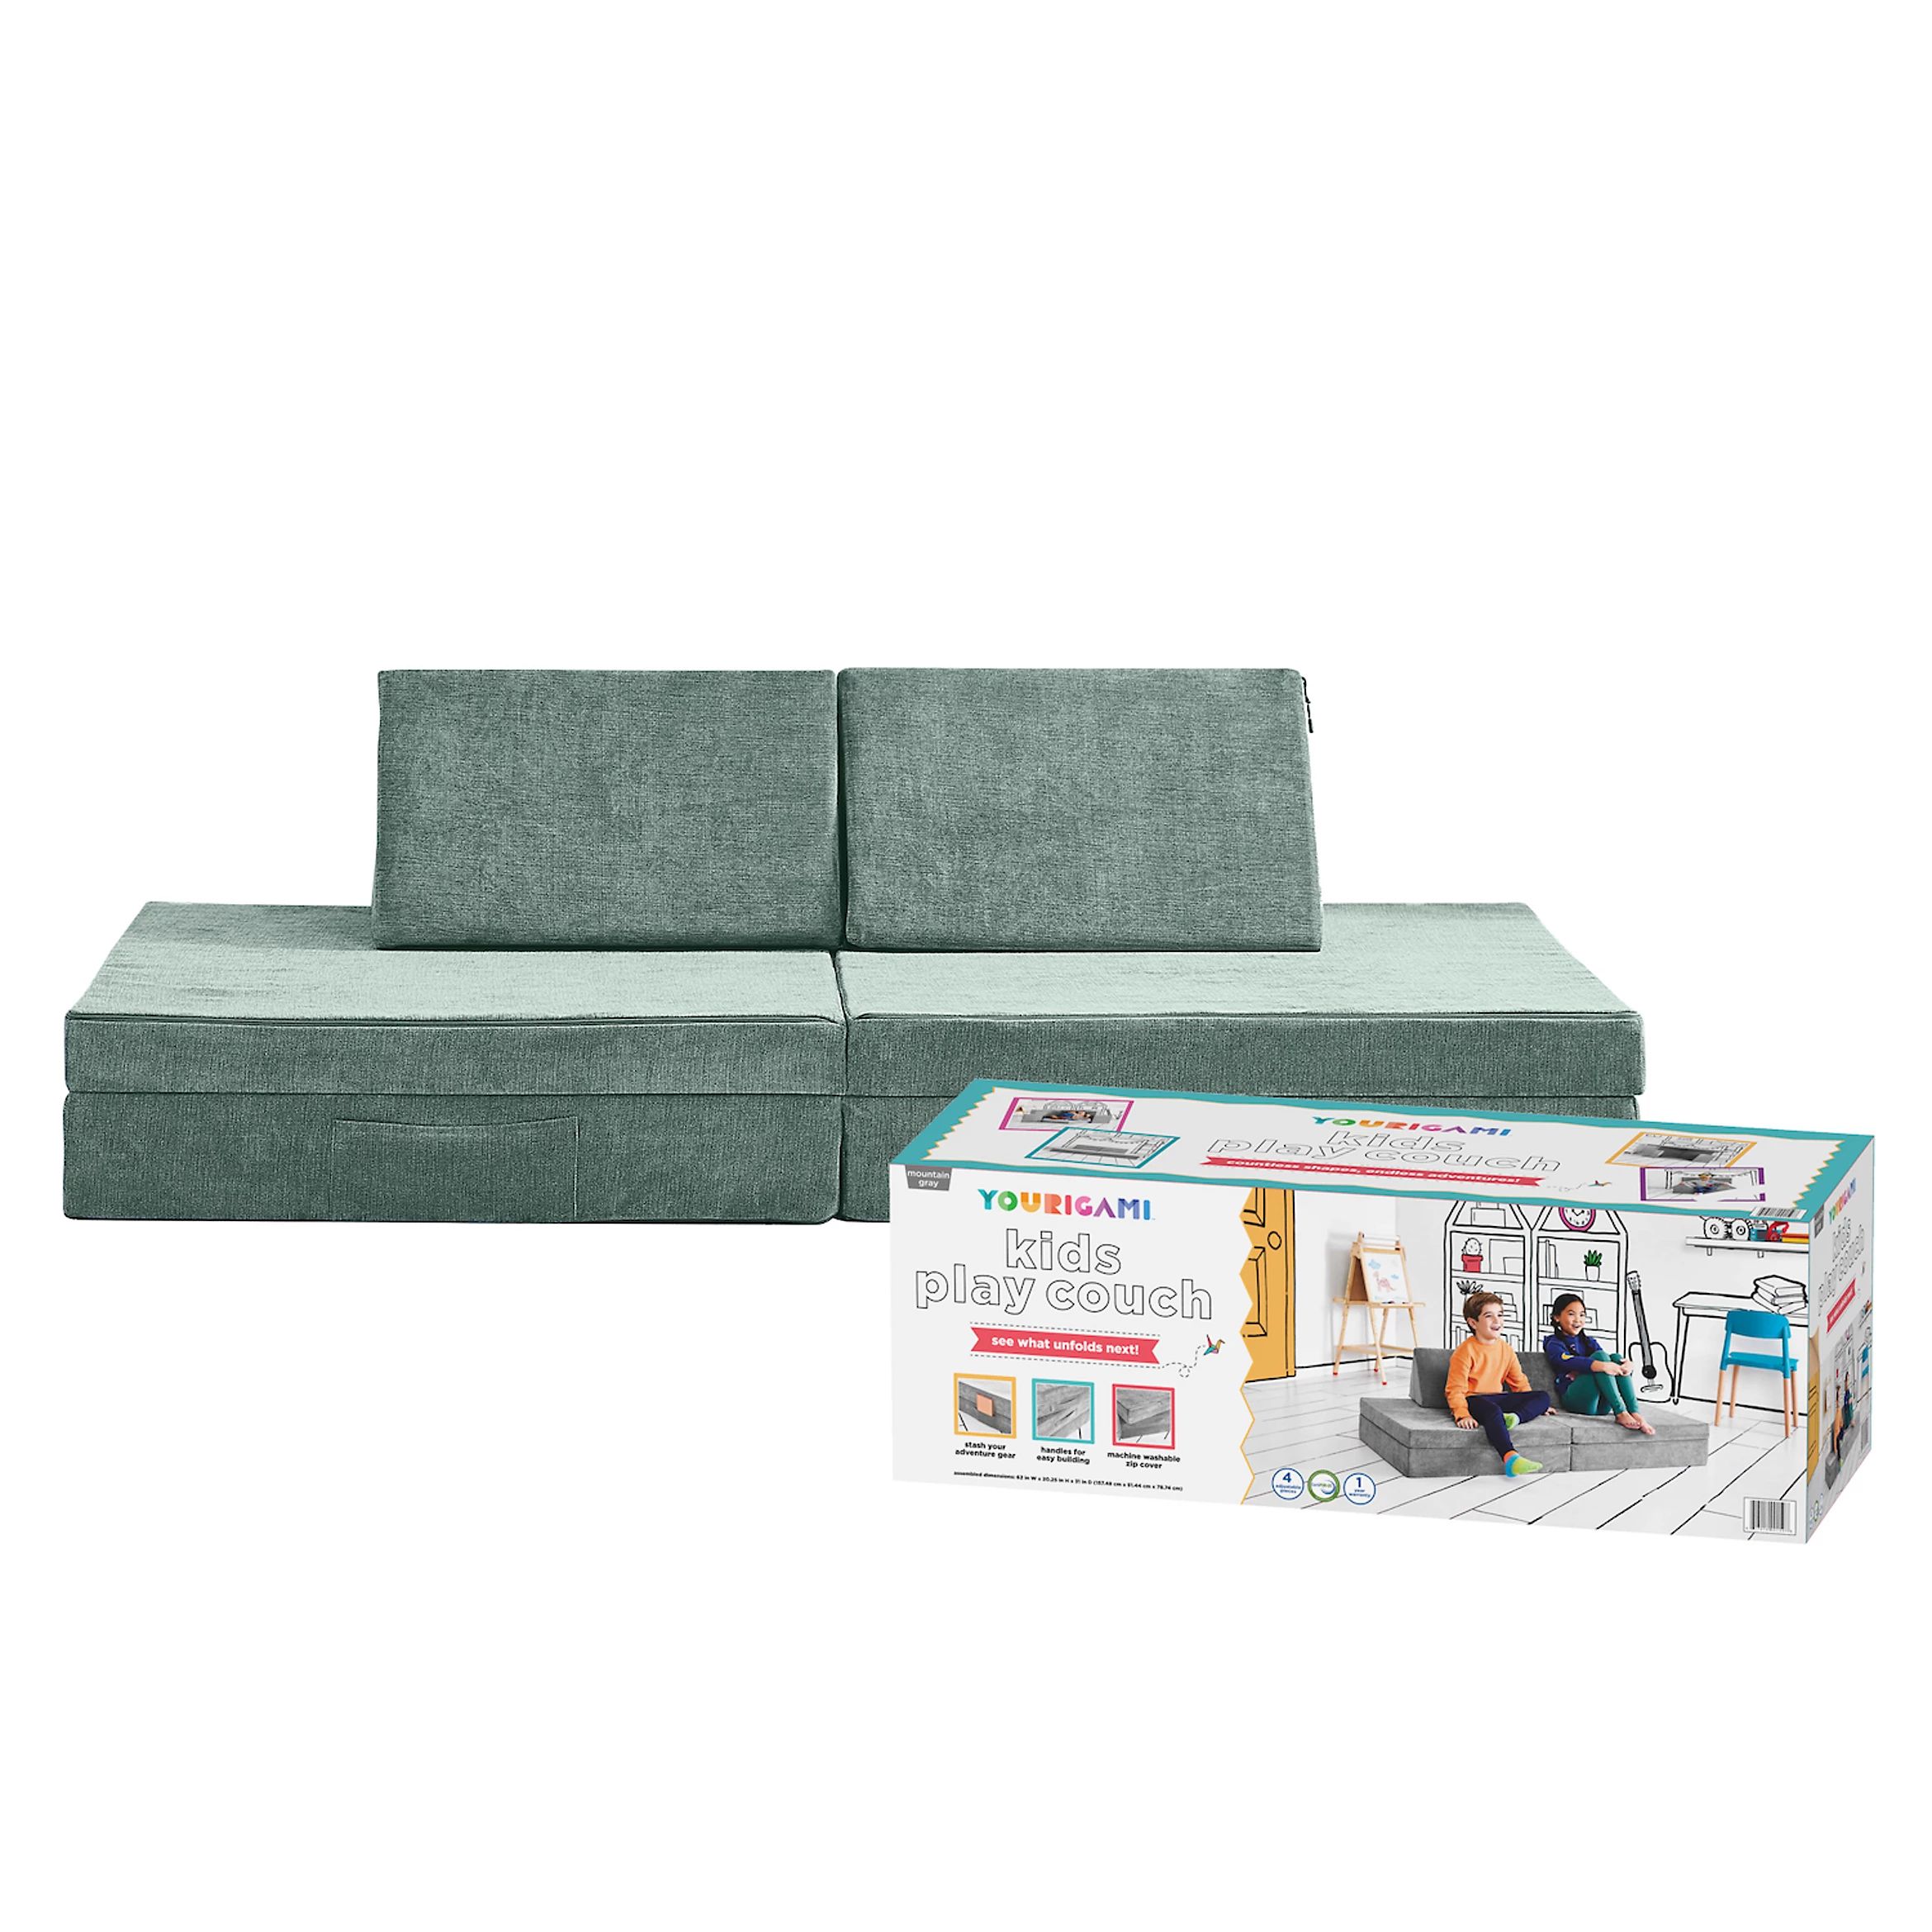 Yourigami Folding Convertible Kids and Toddler Play Couch | Kohl's